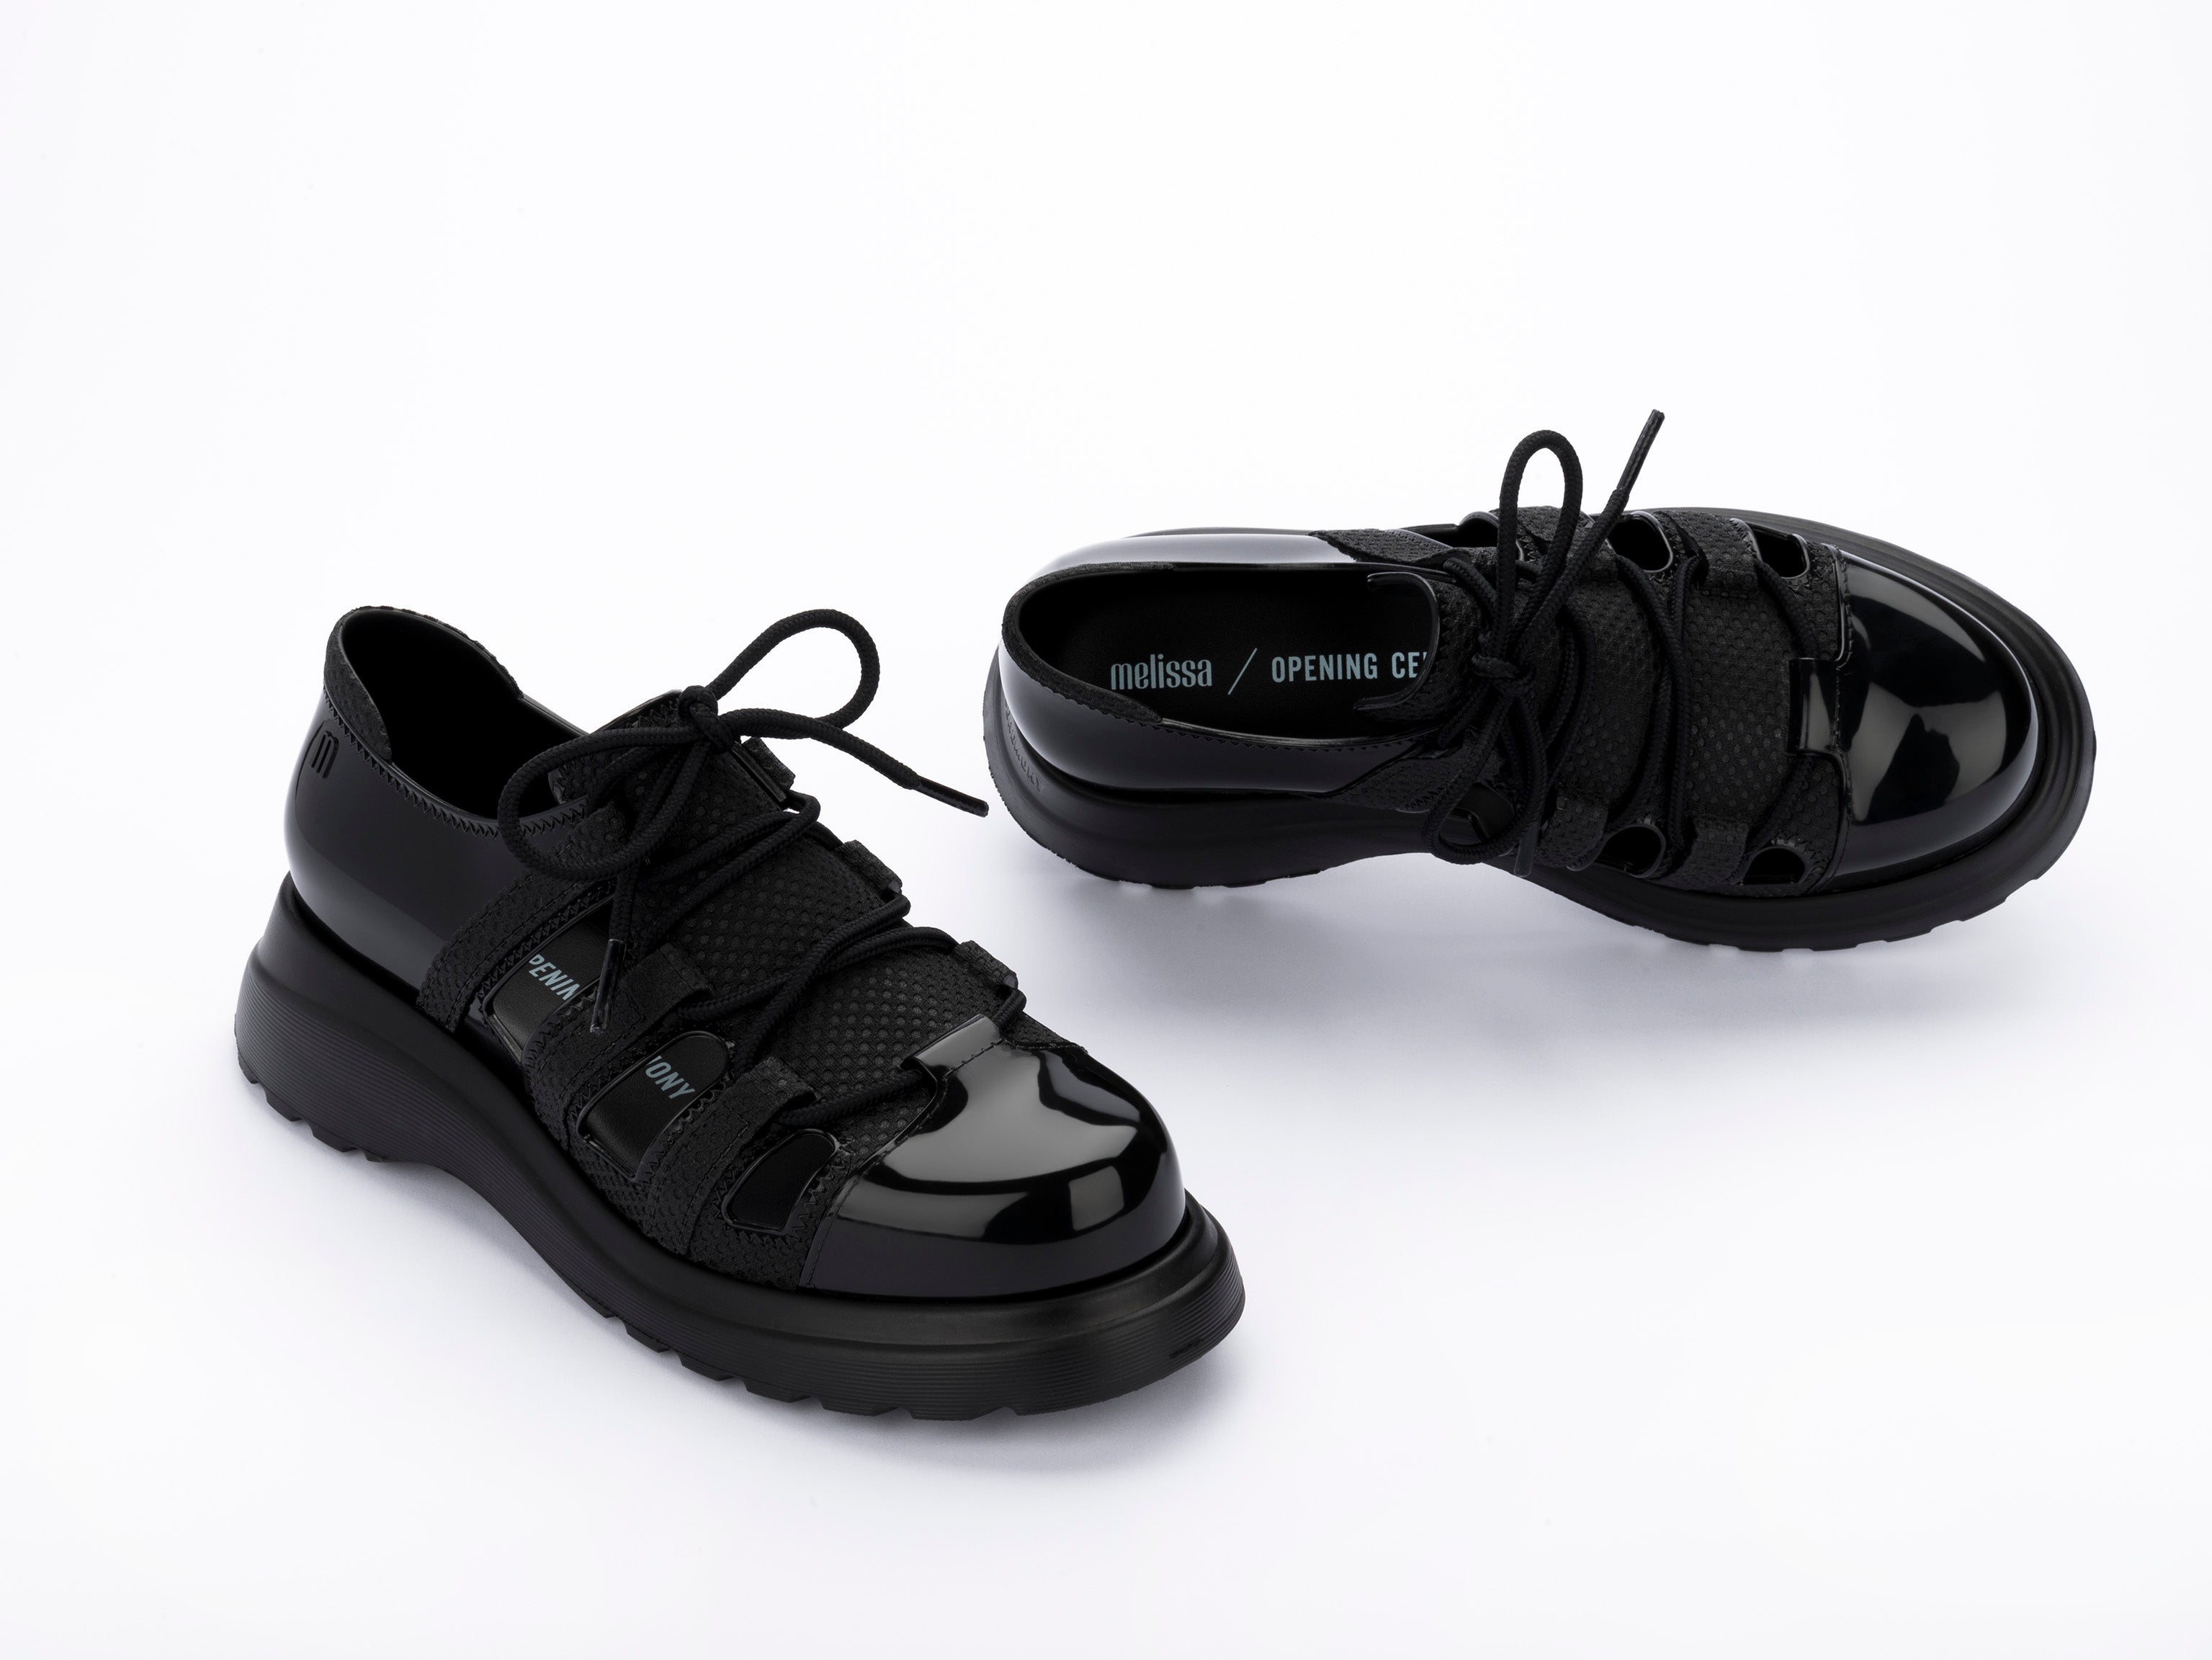 Melissa ＋ OPENING CEREMONY Lacey - Black